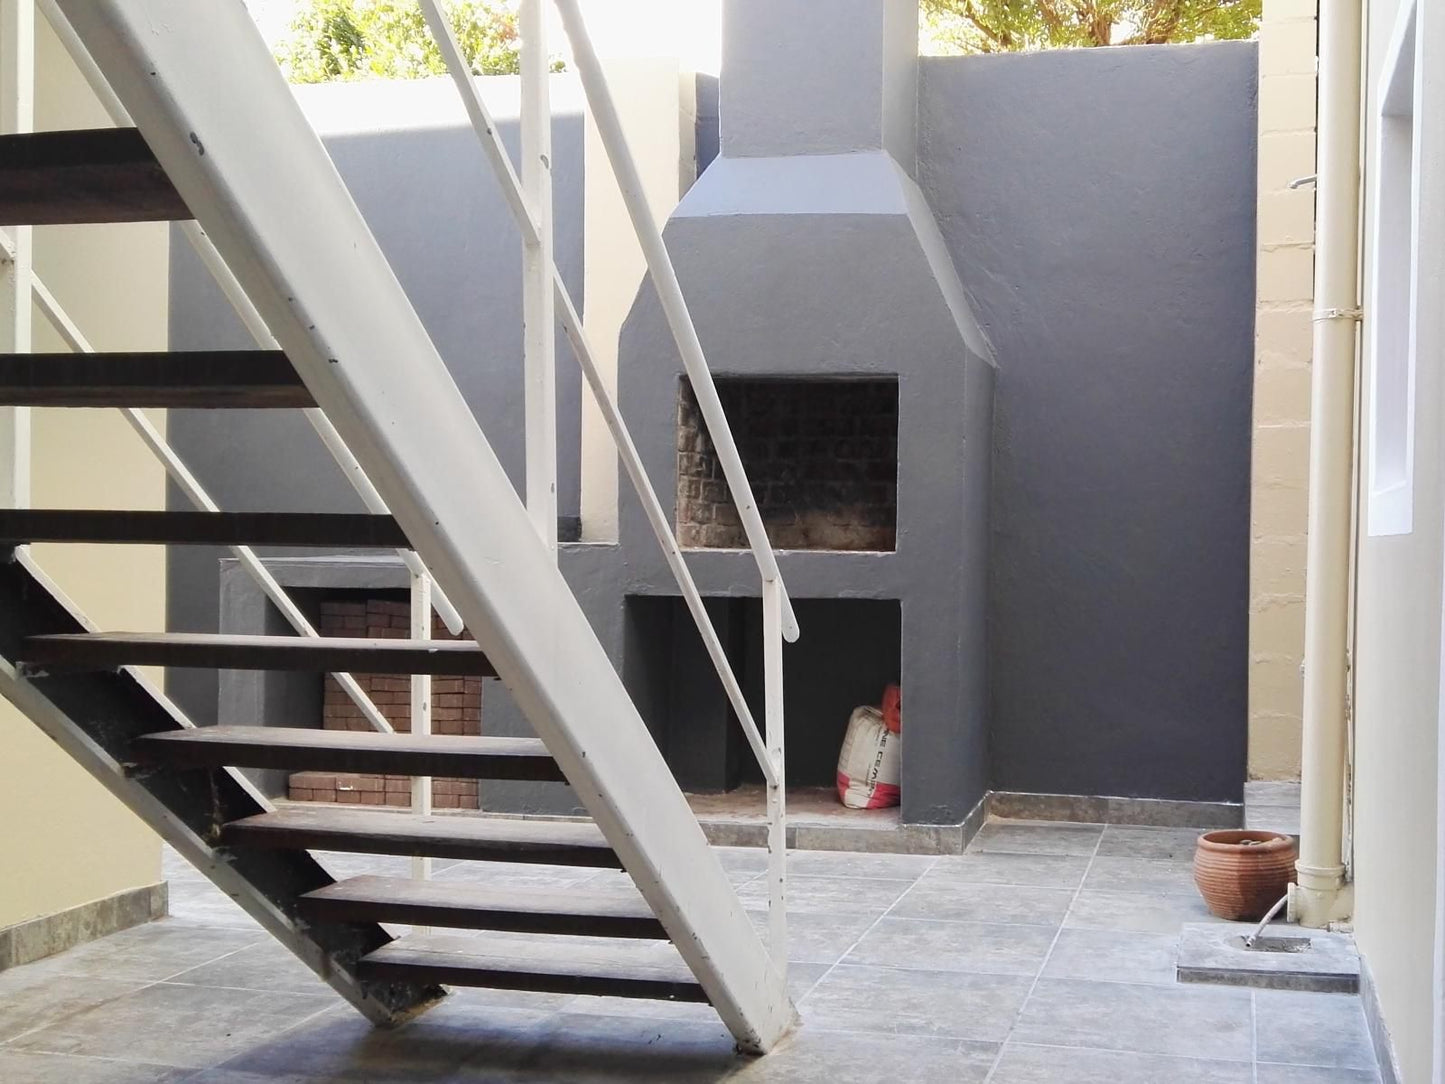 Bergsig Self Catering Mansfield Gordons Bay Western Cape South Africa Stairs, Architecture